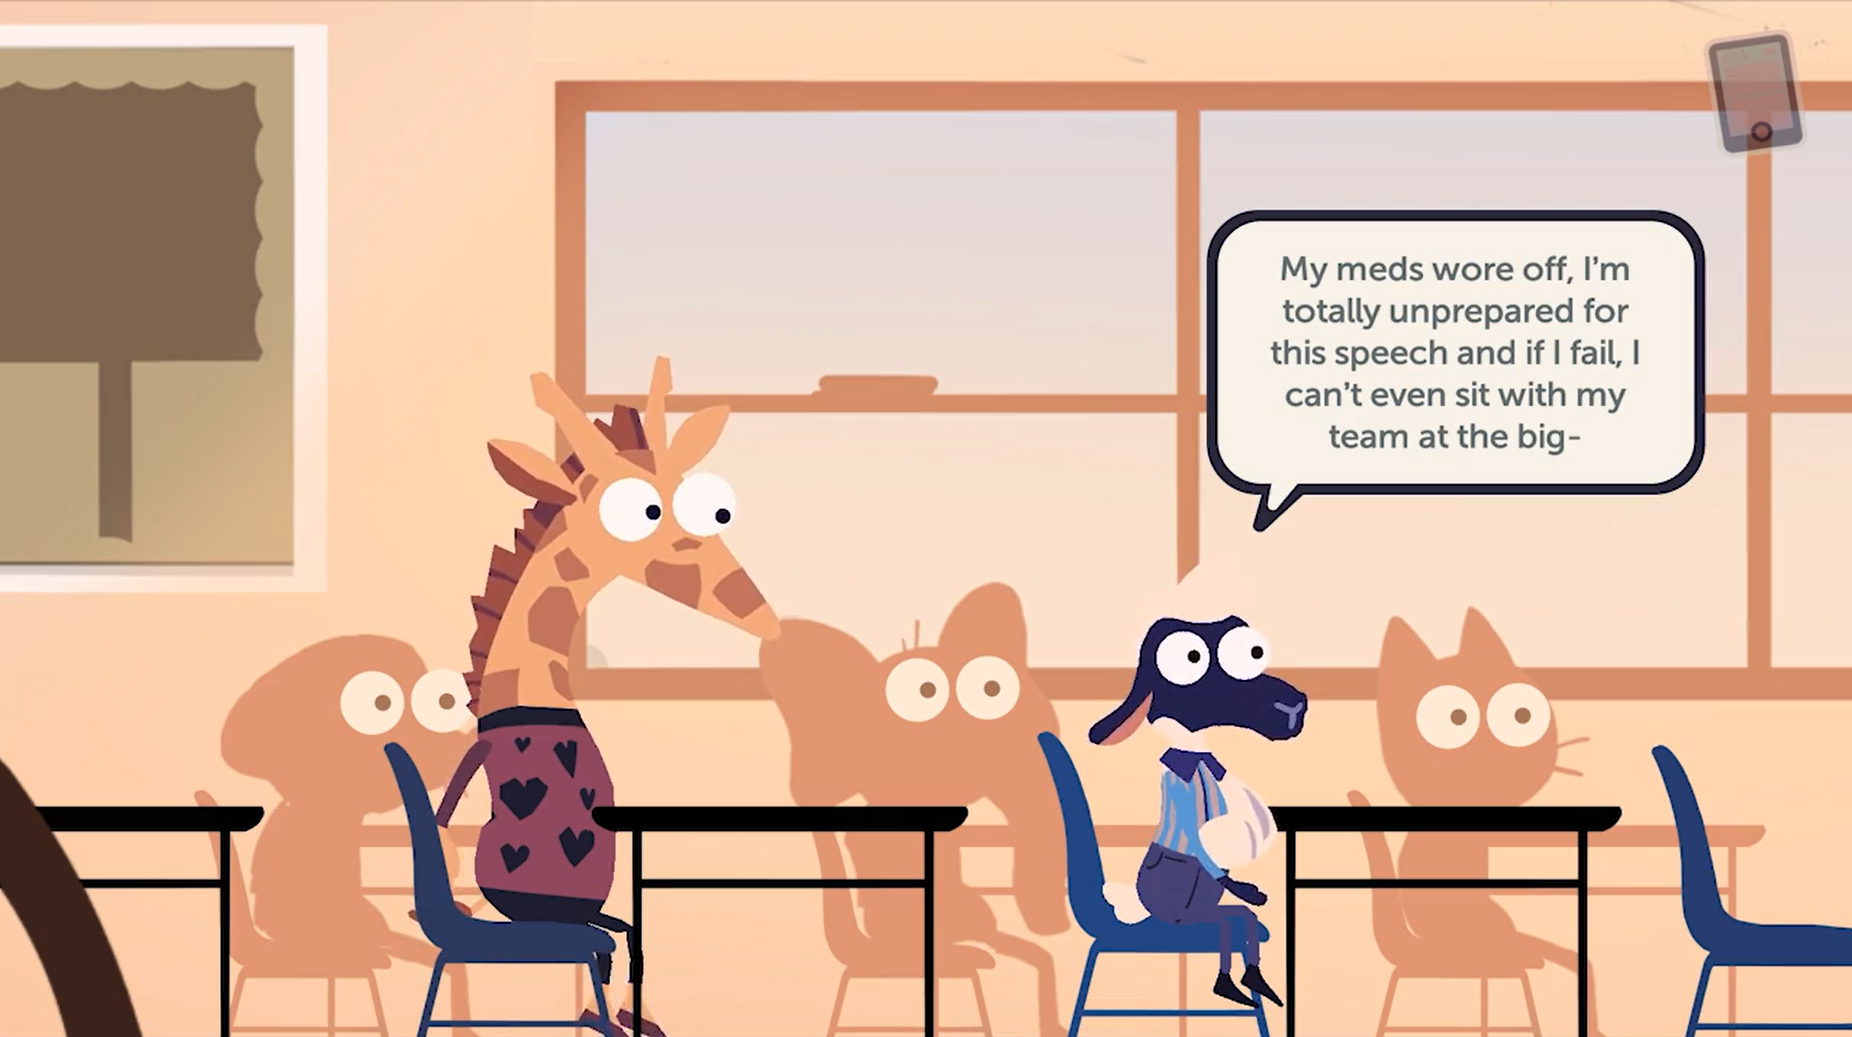 A cartoon of a sheep, elephant, and giraffe sitting at desks in a classroom. The sheep is thinking about how his medications wore off and how he's unprepared for his presentation. 